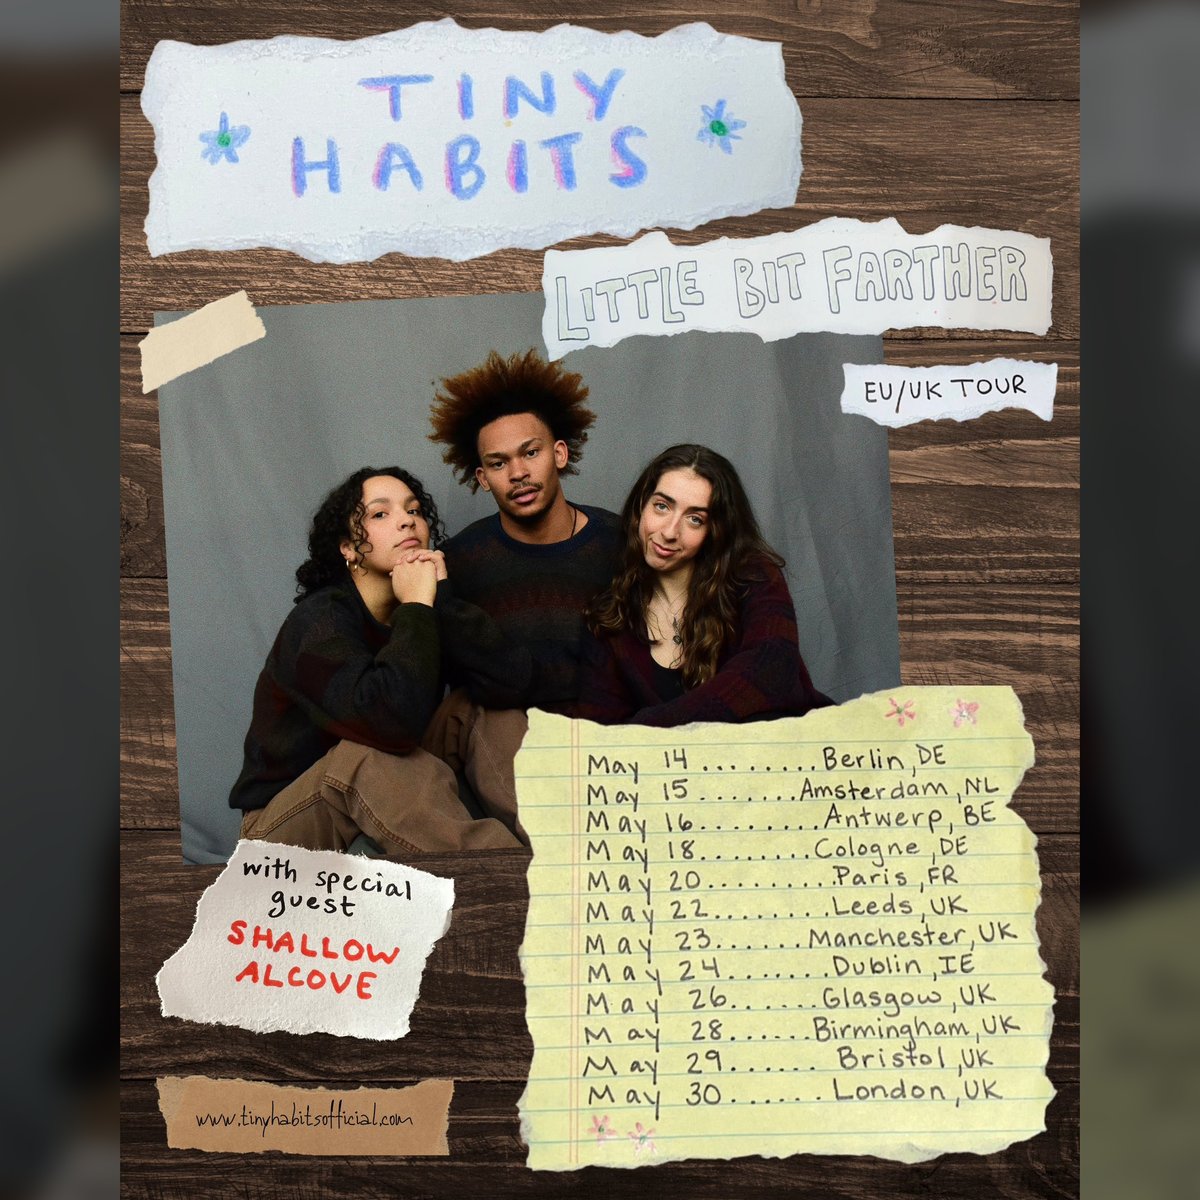 Having just supported Noah Kahan on his UK/EU Tour, folk-pop trio @tinyhabs will be heading to the UK later this month for their very first headline tour!

As part of a wider European run, the band will play 7 dates across the UK and Ireland, with support from @ShallowAlcove:…